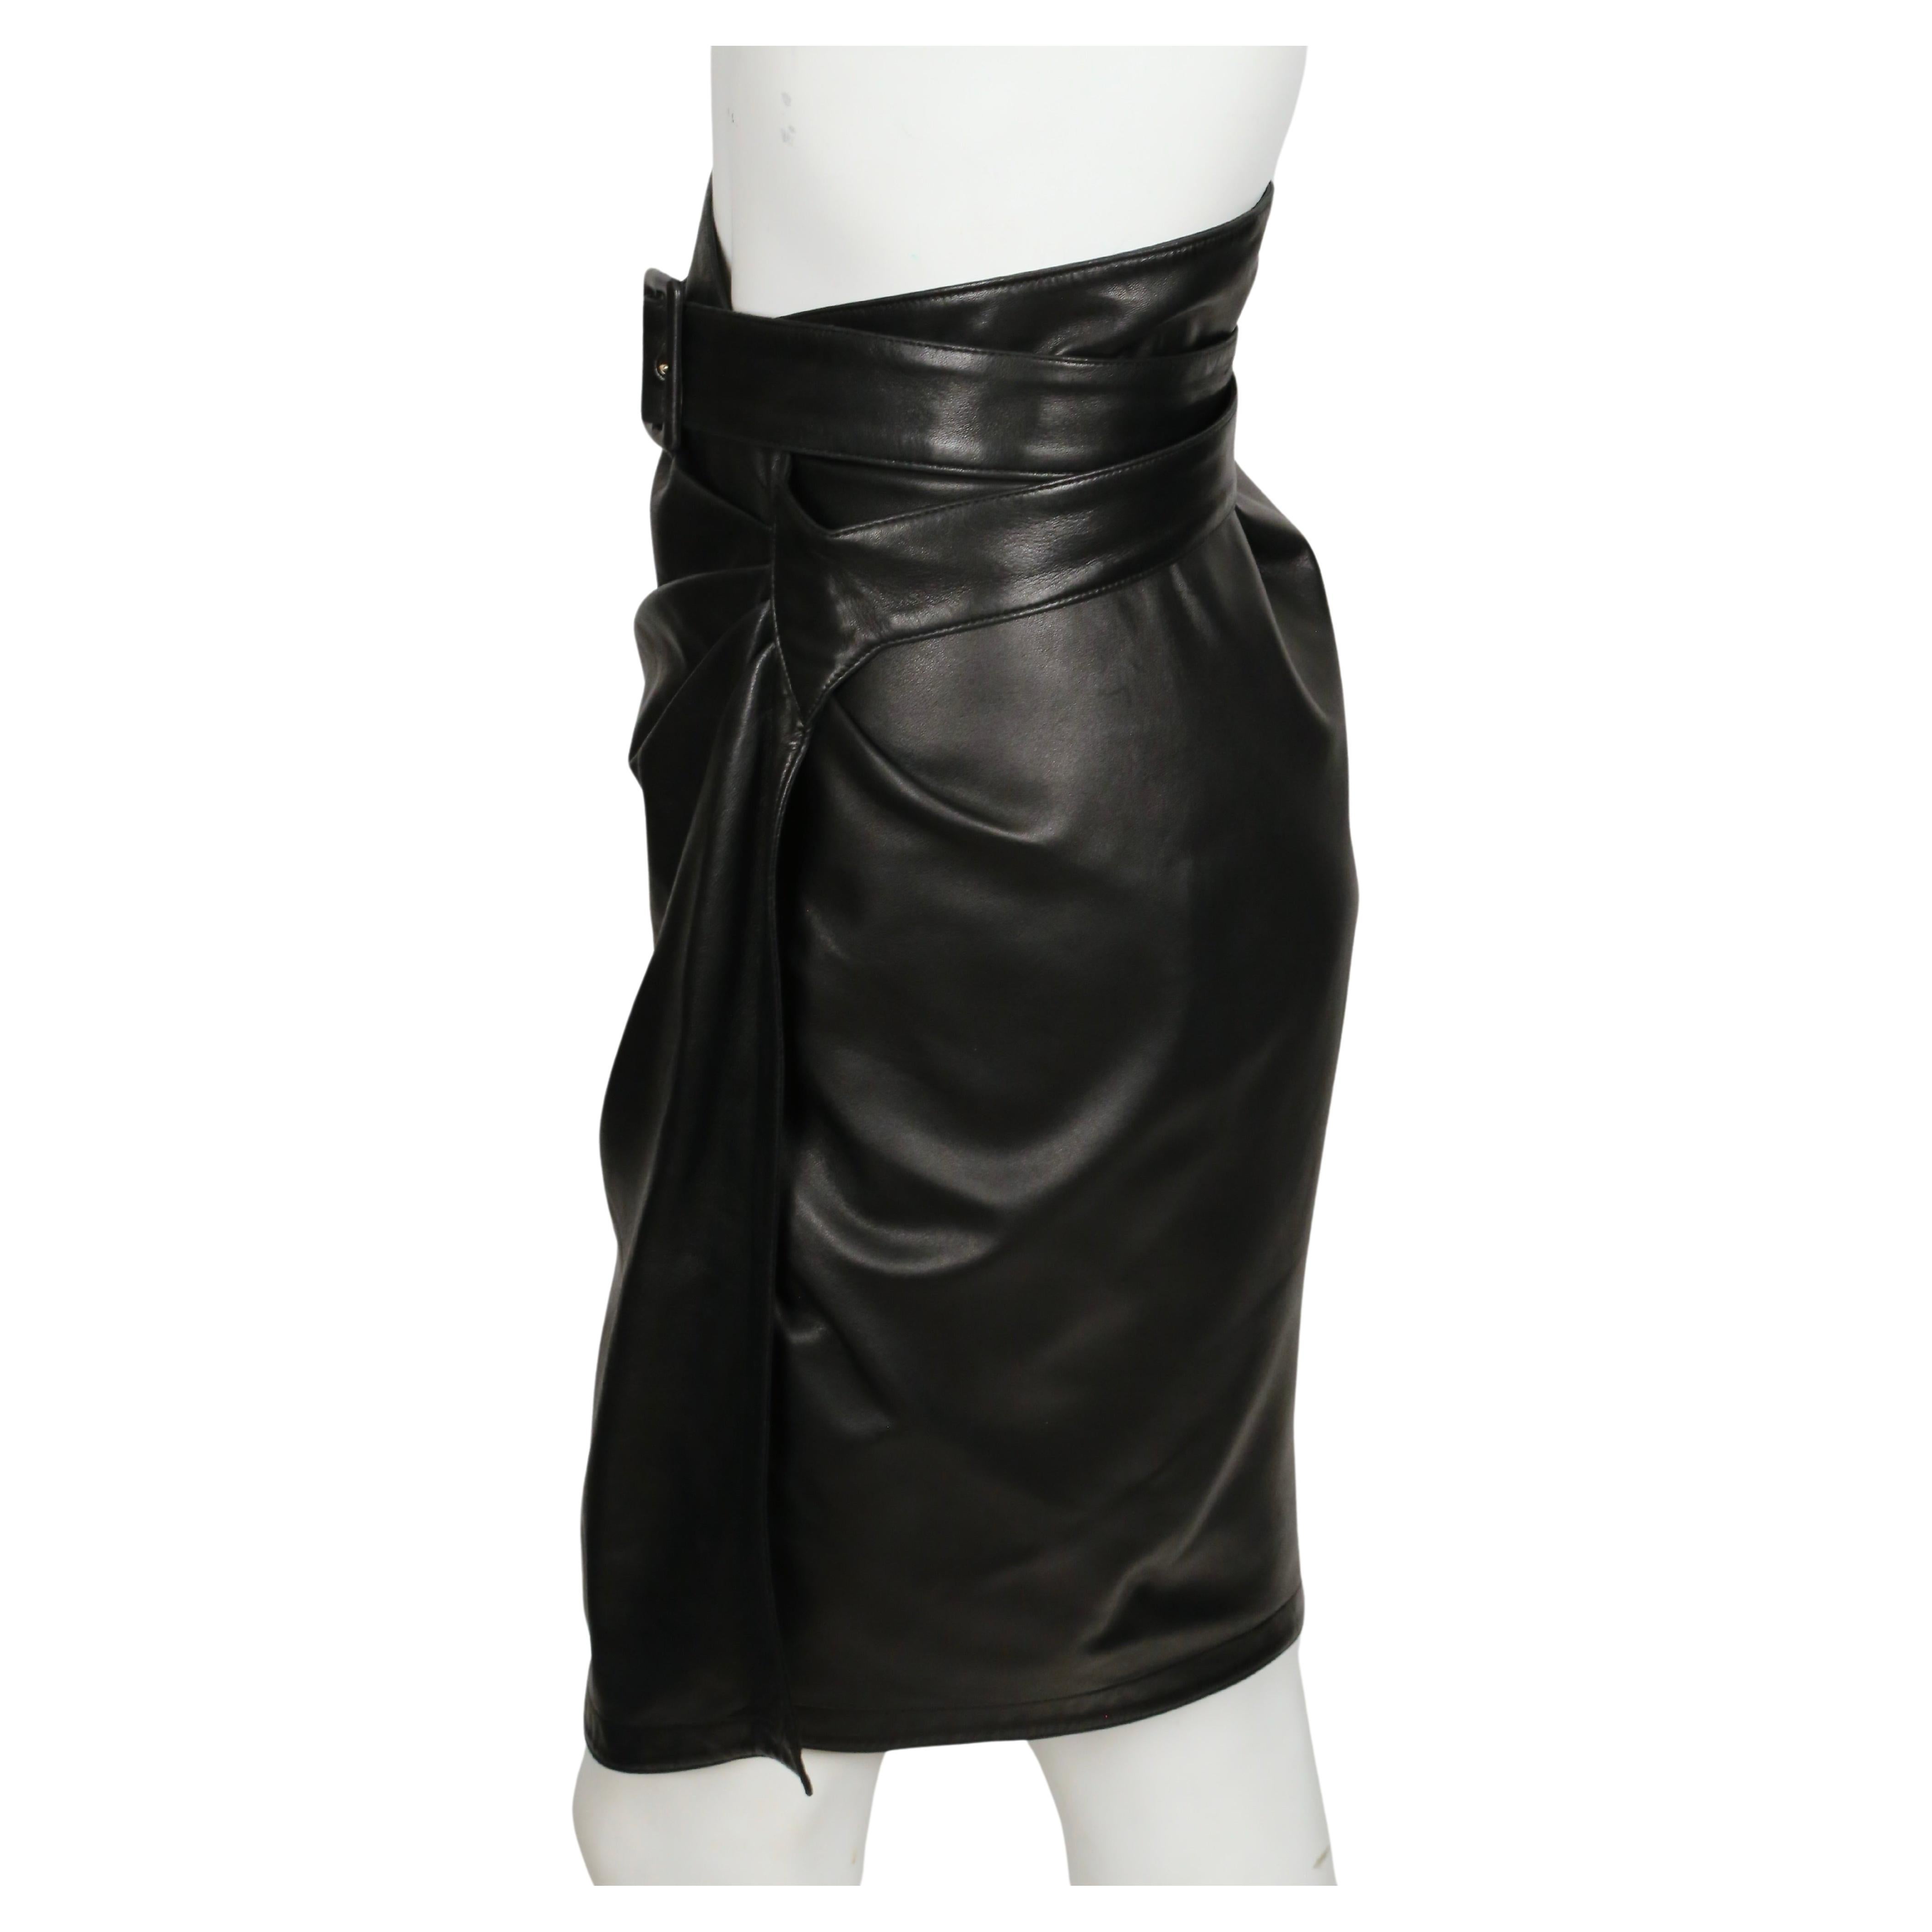 1984 AZZEDINE ALAIA black leather wrap skirt with side buckle In Good Condition For Sale In San Fransisco, CA